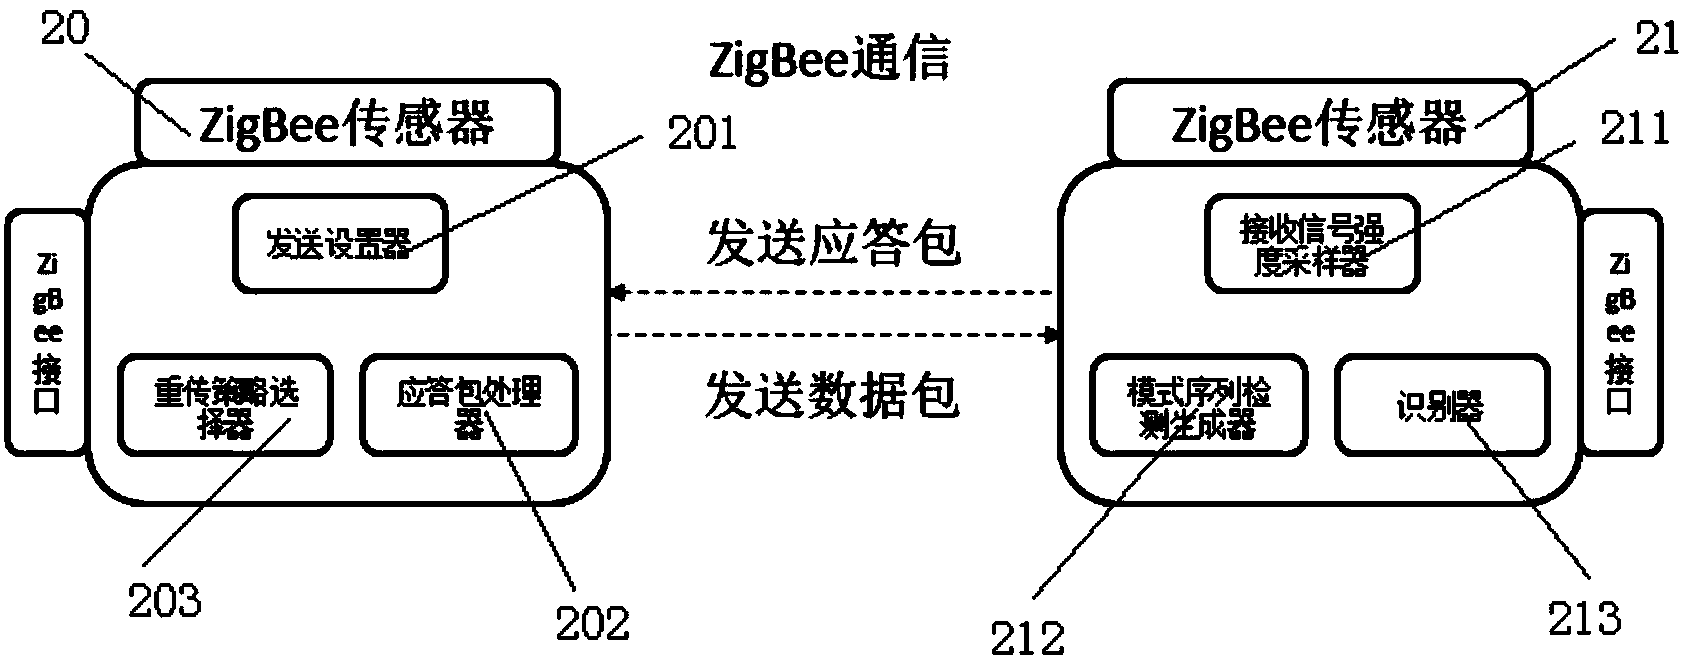 Method and system for identifying reasons of ZigBee sensor network packet loss